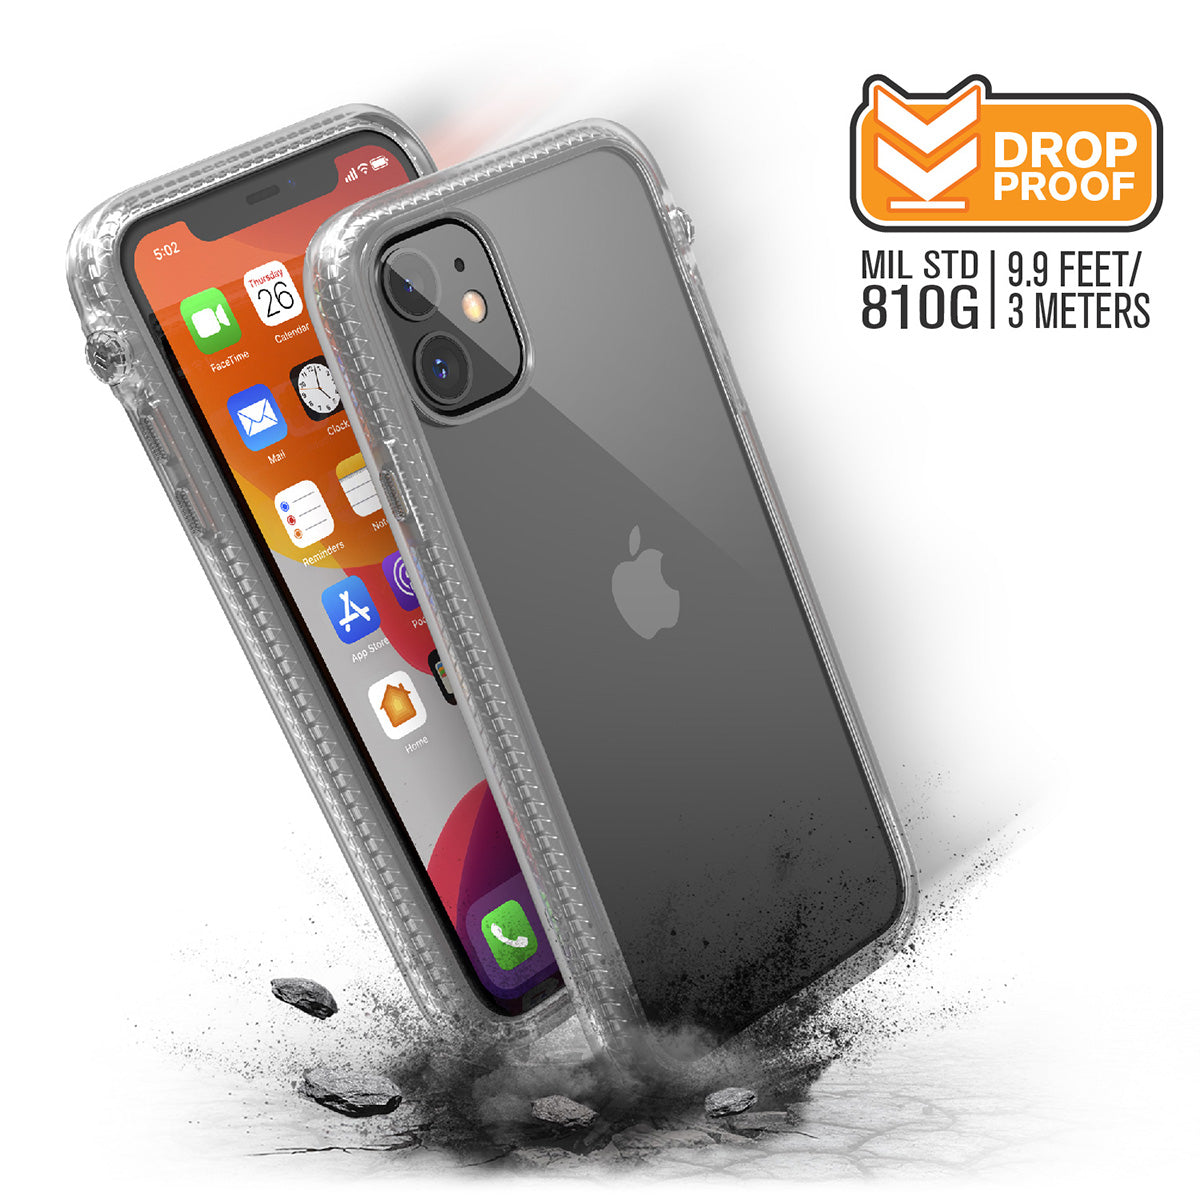 catalyst iPhone 11 series impact protection case clear showing side views and buttons of the case with cracked floor for iPhone 11 text reads drop proof mil std 9.9 feet 810g 3 meters